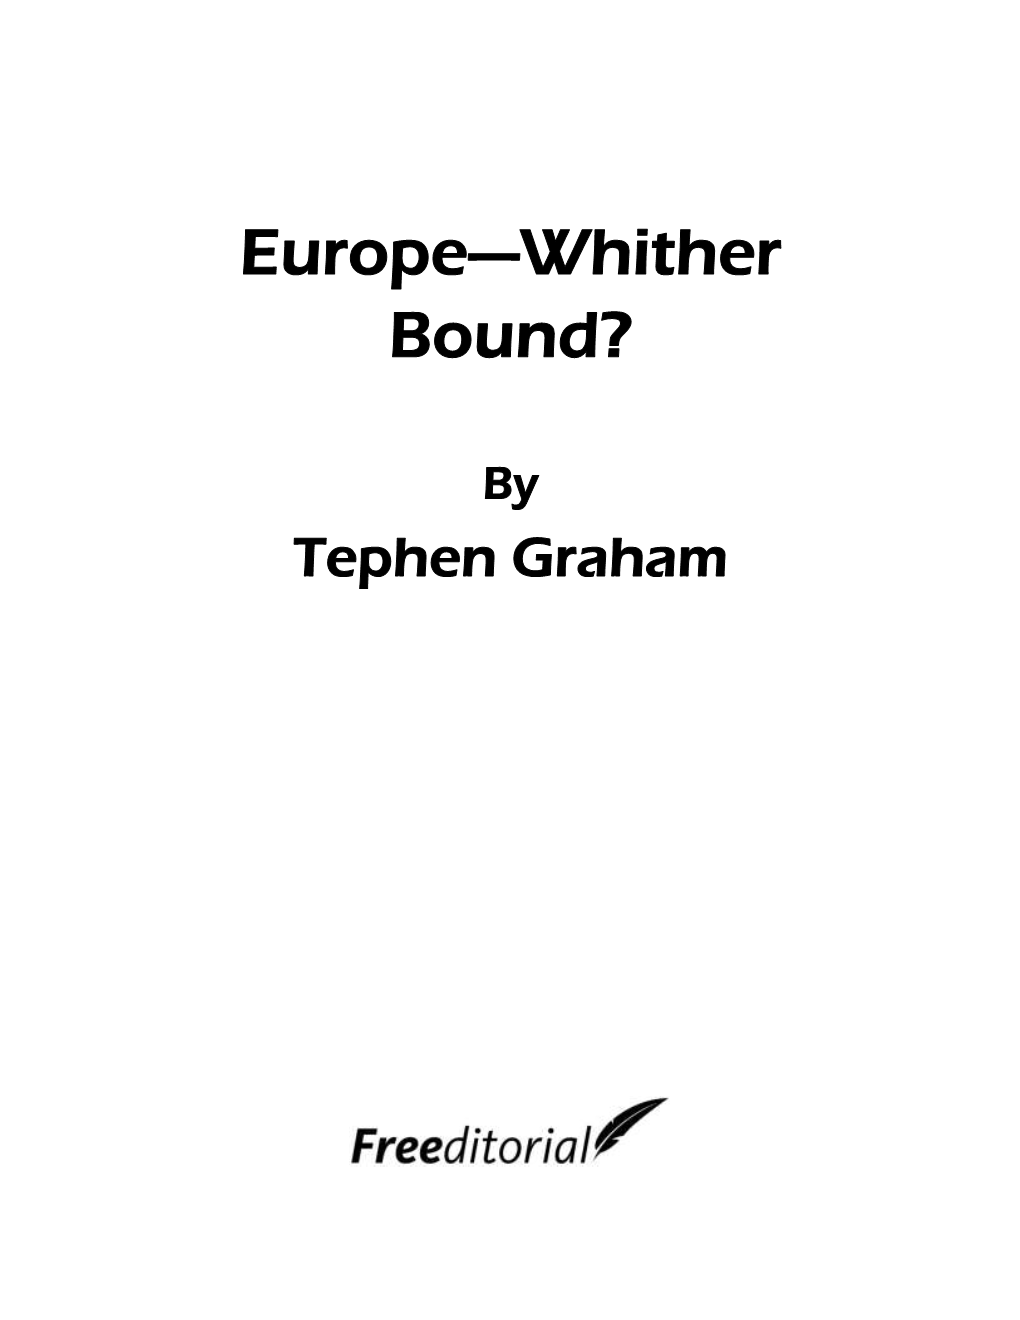 Europe—Whither Bound?